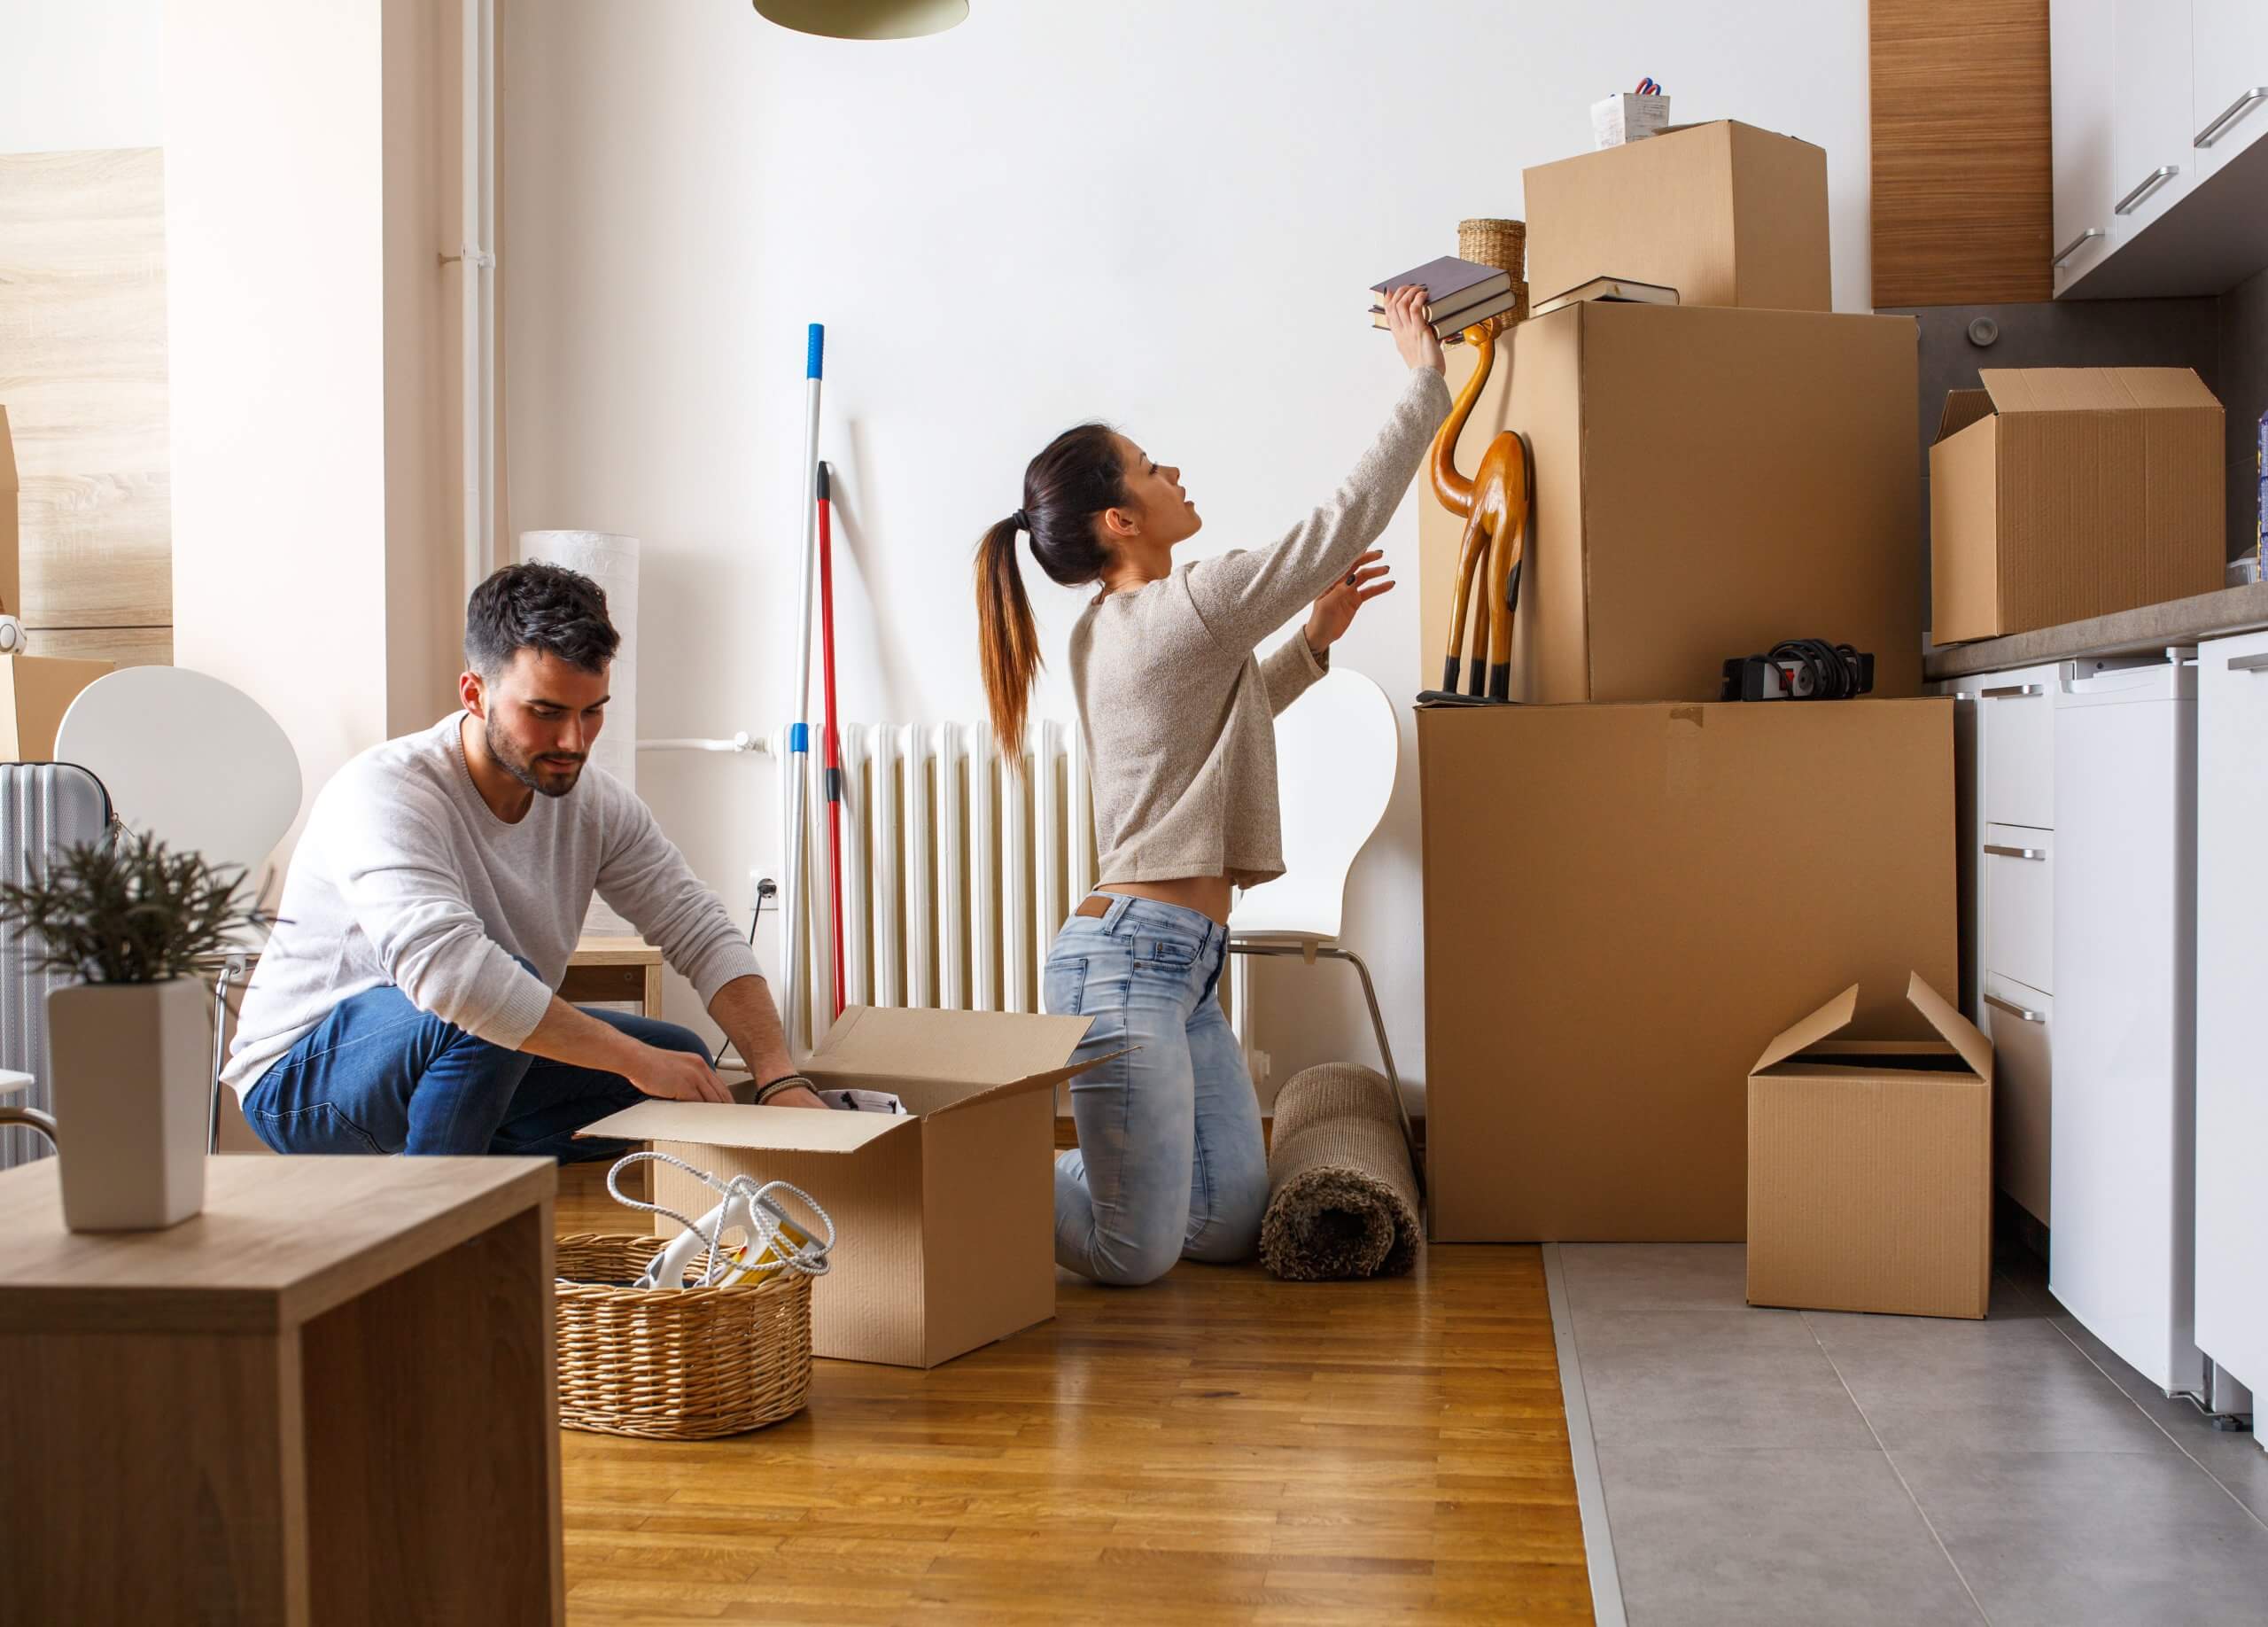 4 Things You Can Do When Moving House to Make Things Easier